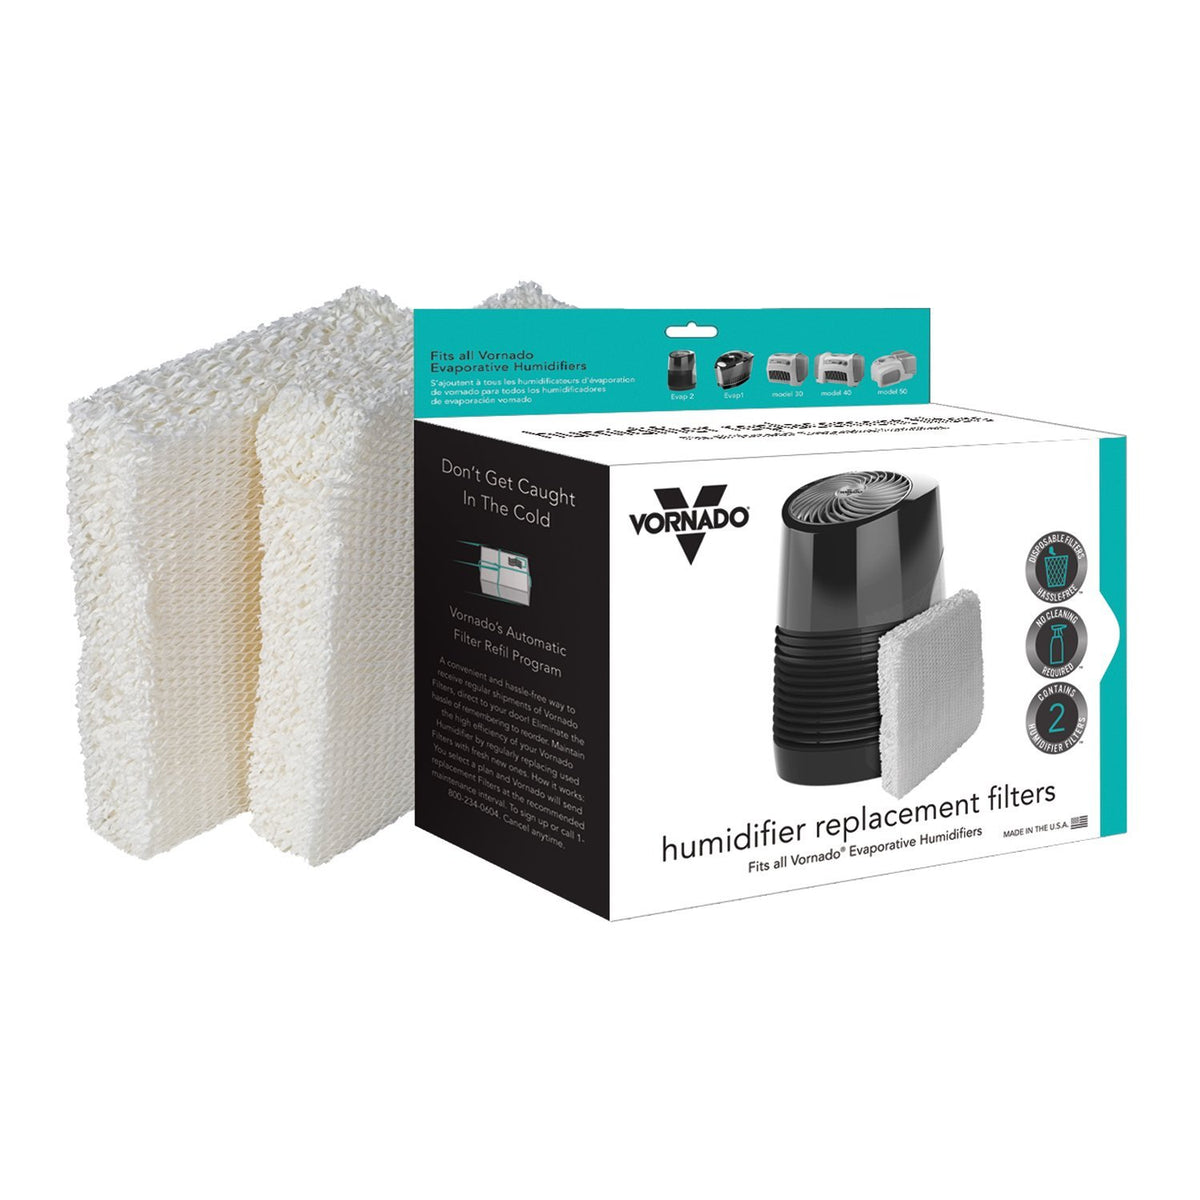 Vornado MD1-0002-A Humidifier Replacement Filter, Pack-2